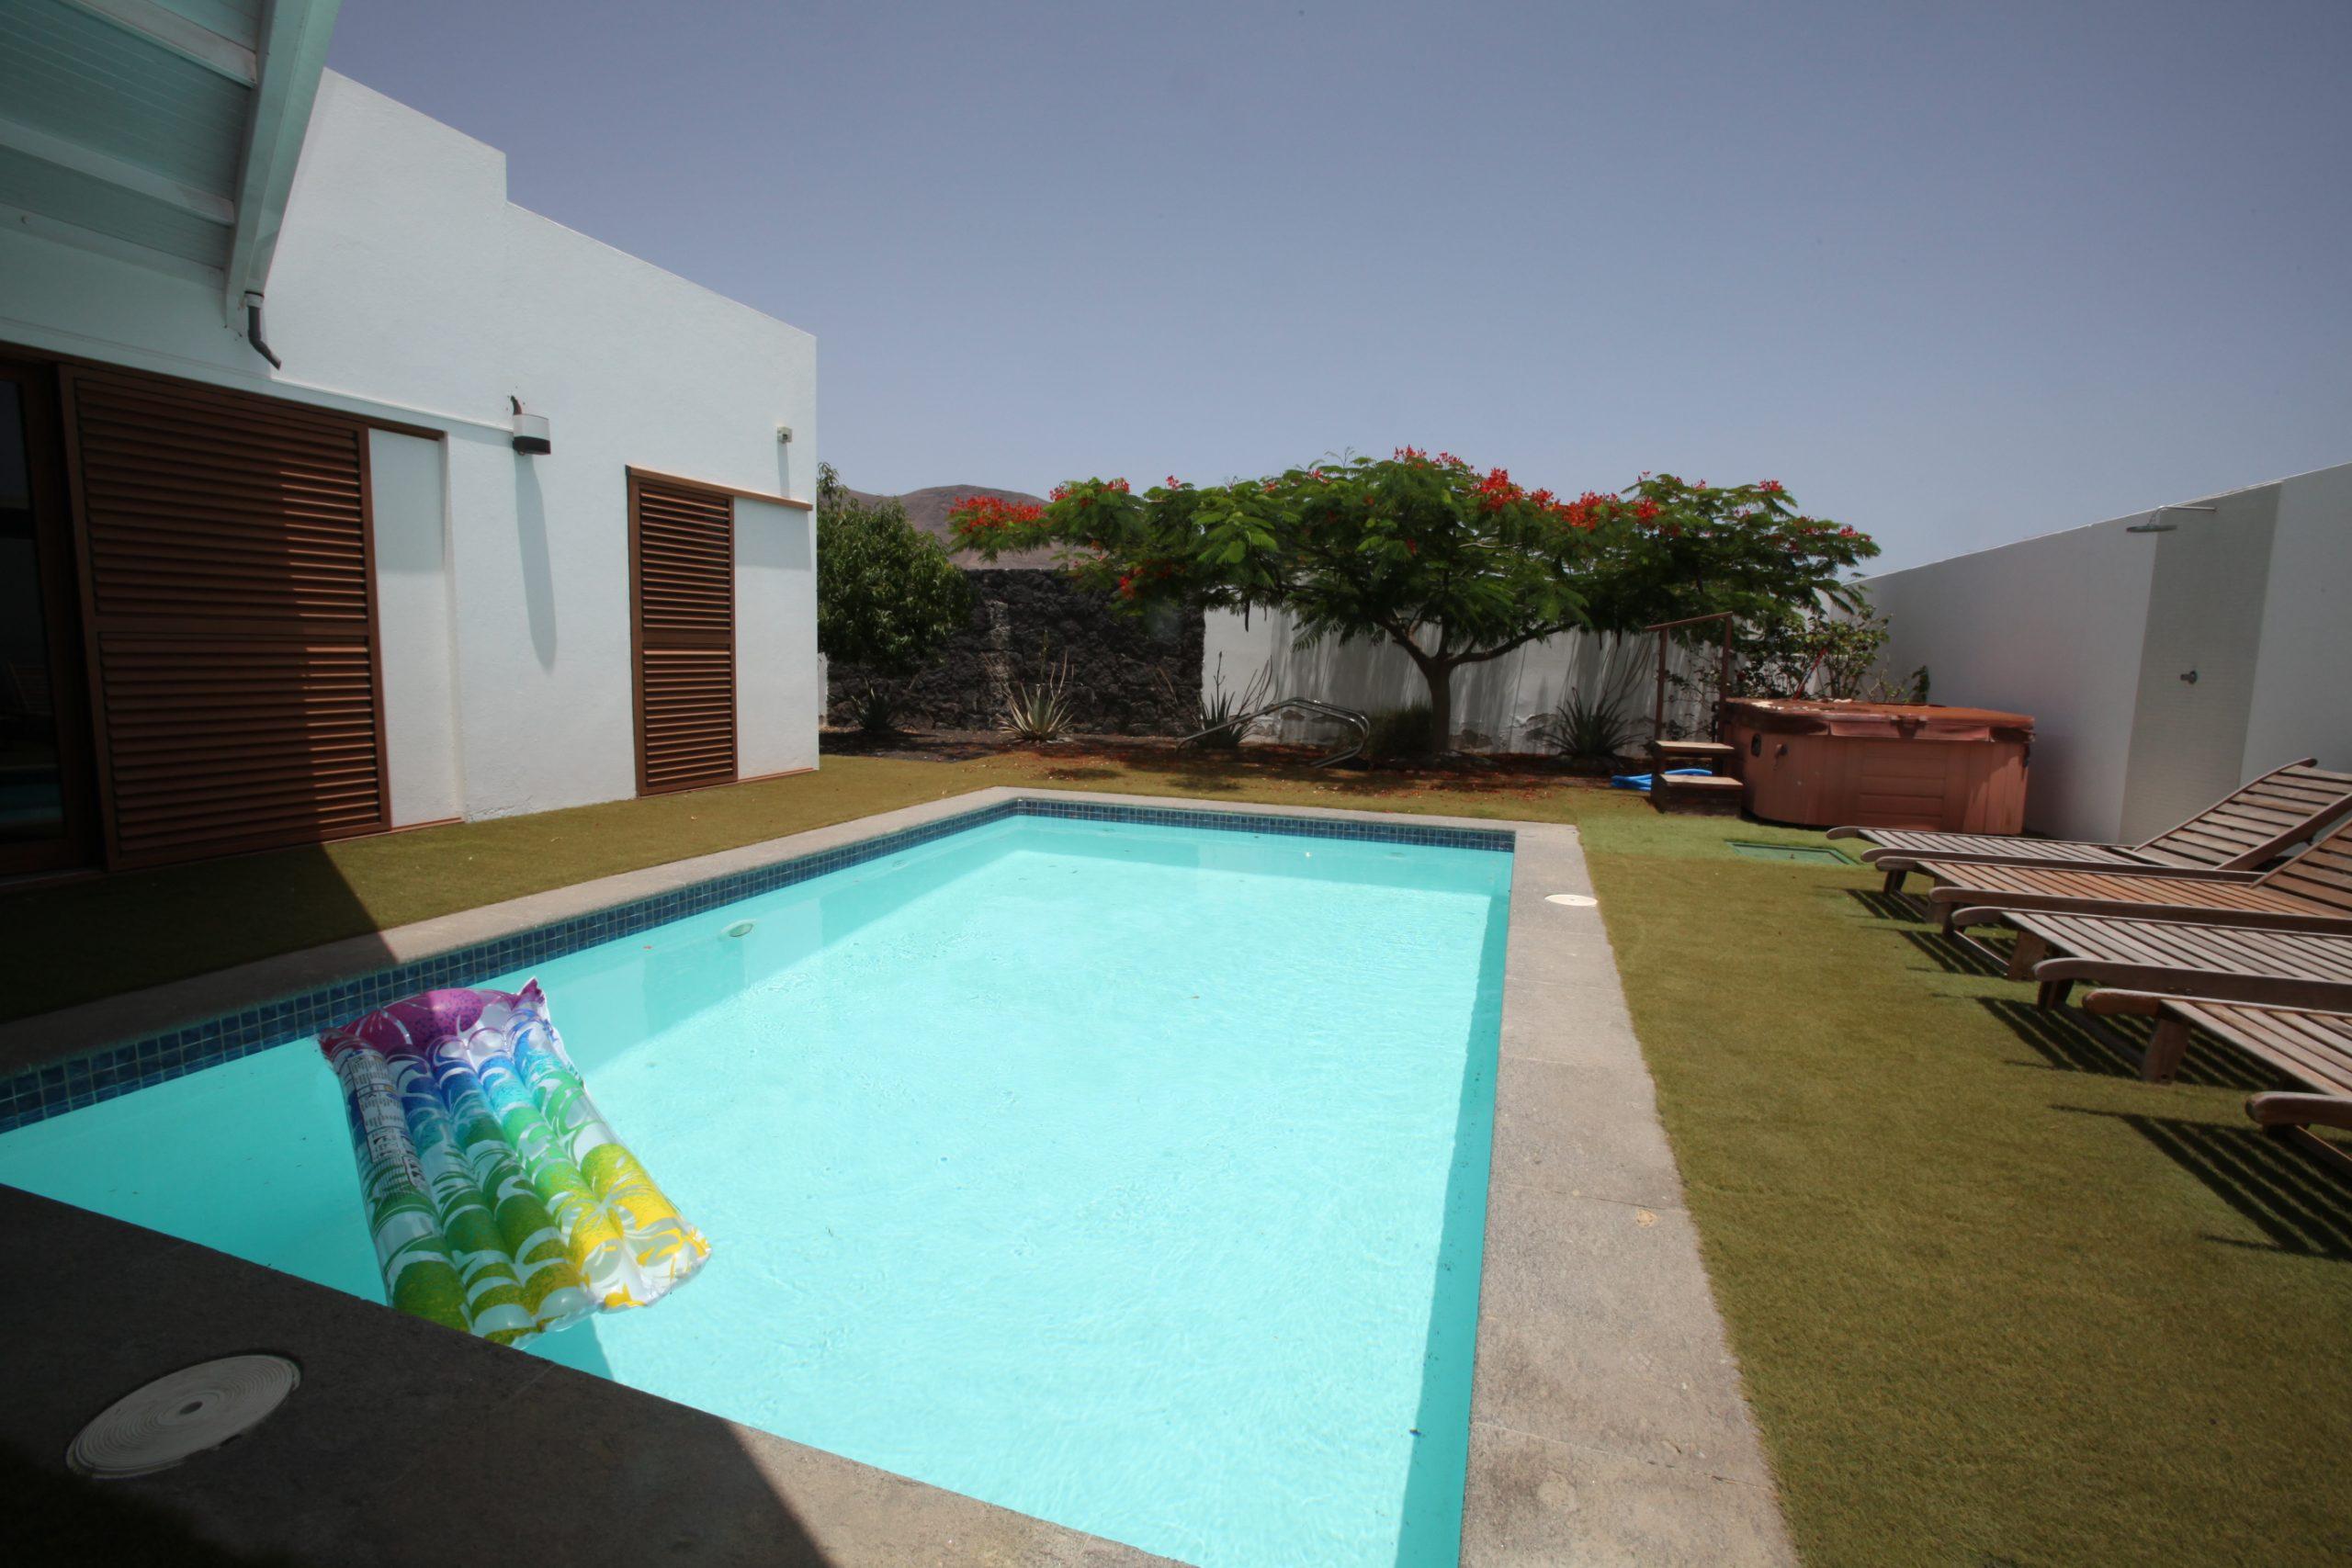 Superb Villa for sale in Lanzarote Detached 2 Bedroom Villa With Private Pool And Refurbished To A Highest Standard